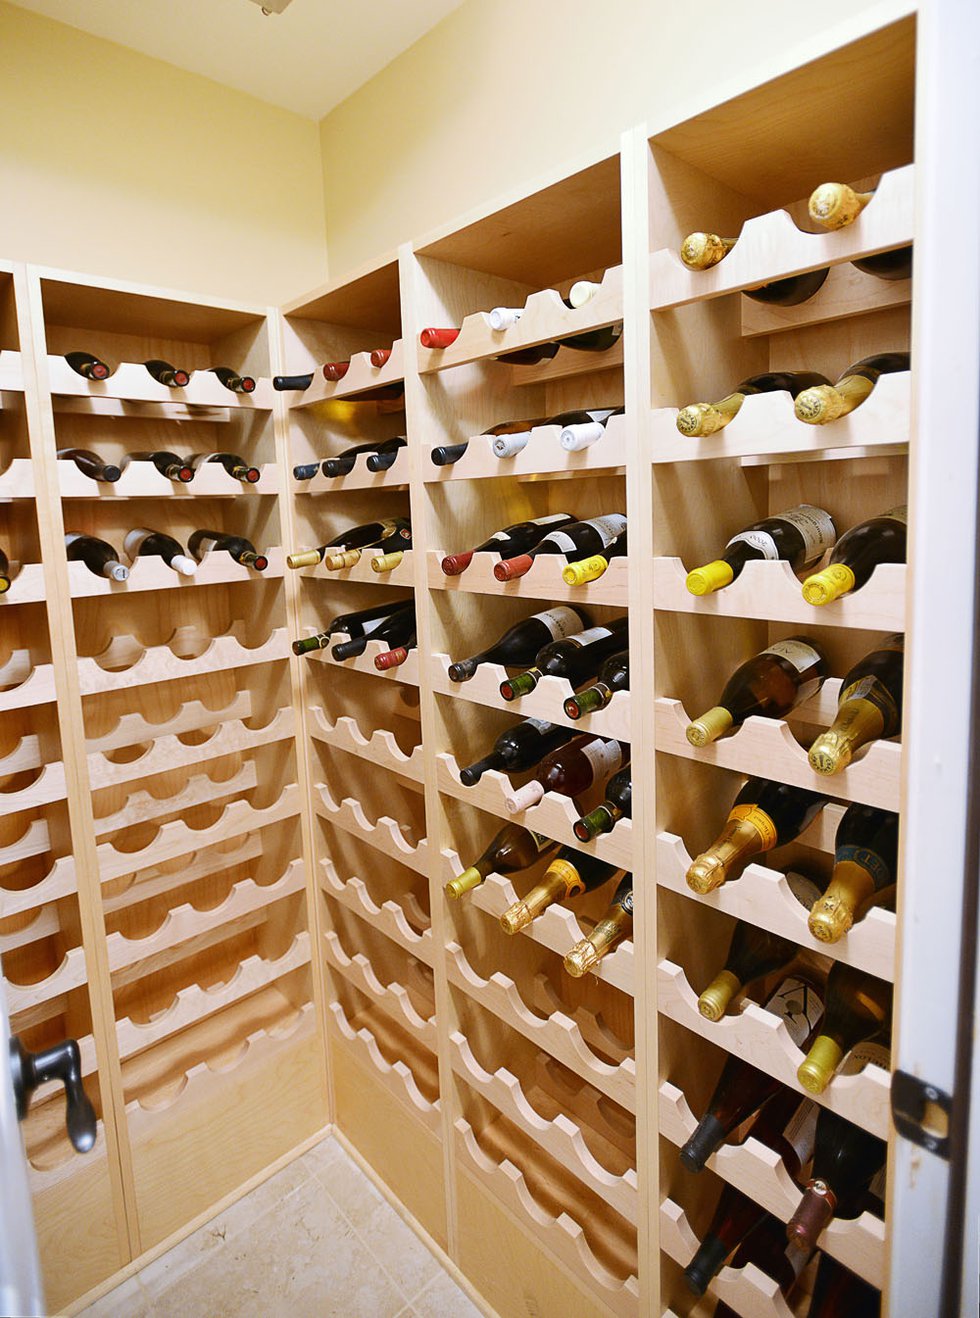 The house features a “wine closet” on the second floor, appropriately sized for the couple’s “rightsized” Trezevant home.